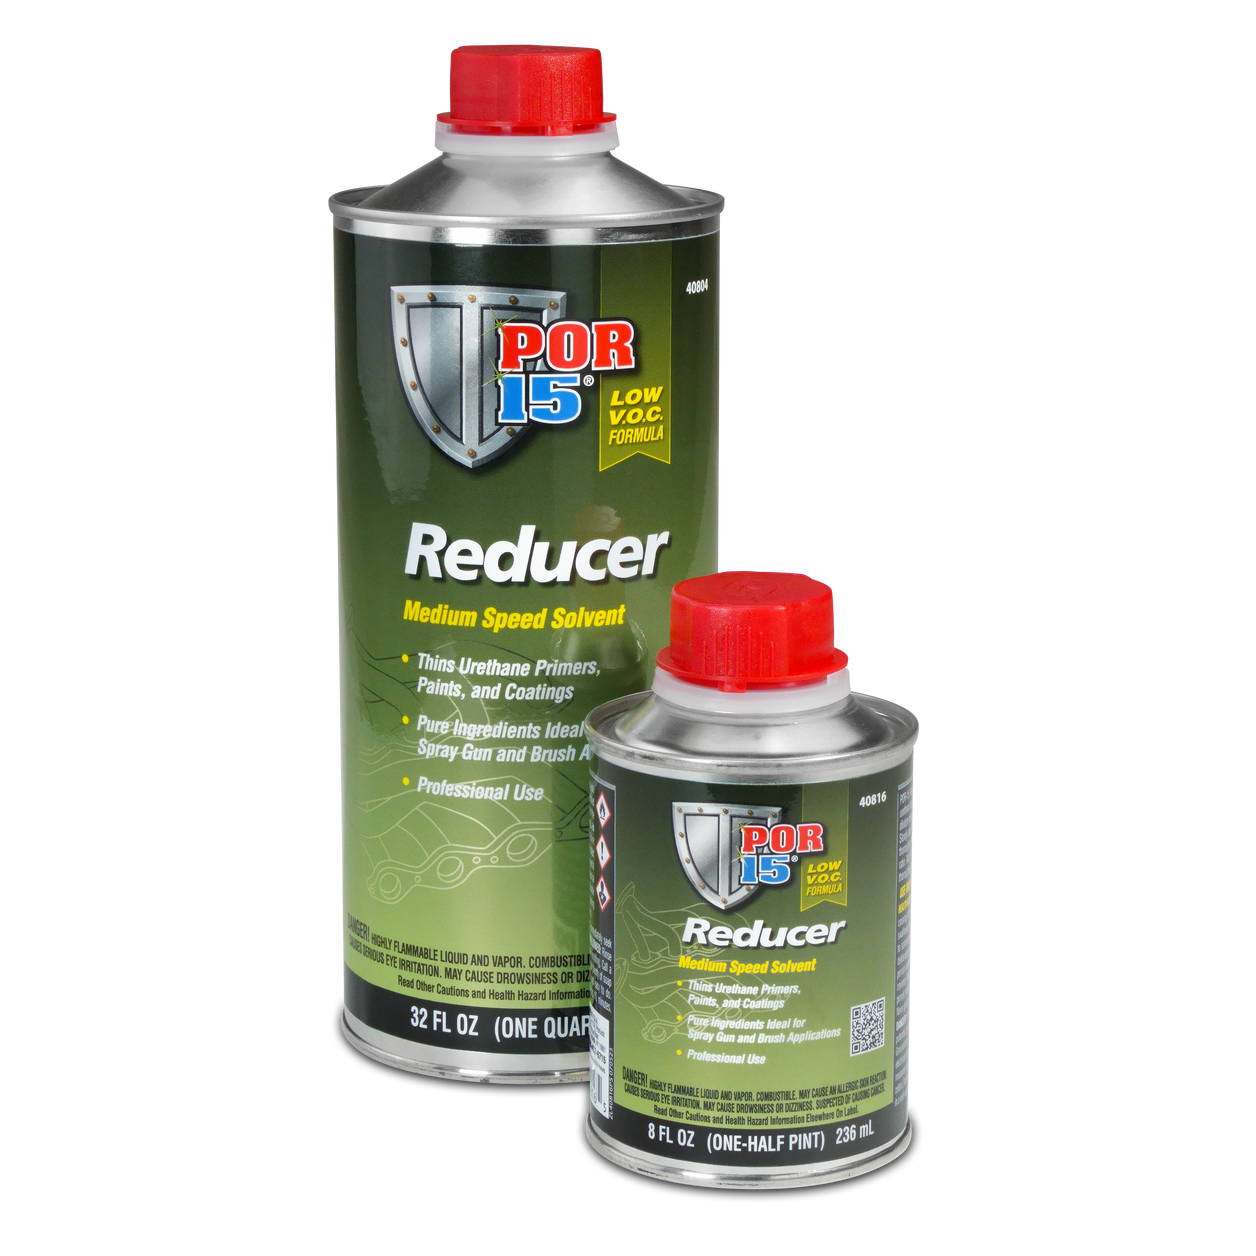 POR-15 Rust Preventive Coating, Clear Gloss, gallon, use as step 3 of the  3-step Rust Prevention System - #POR-15-CRG - National Parts Depot